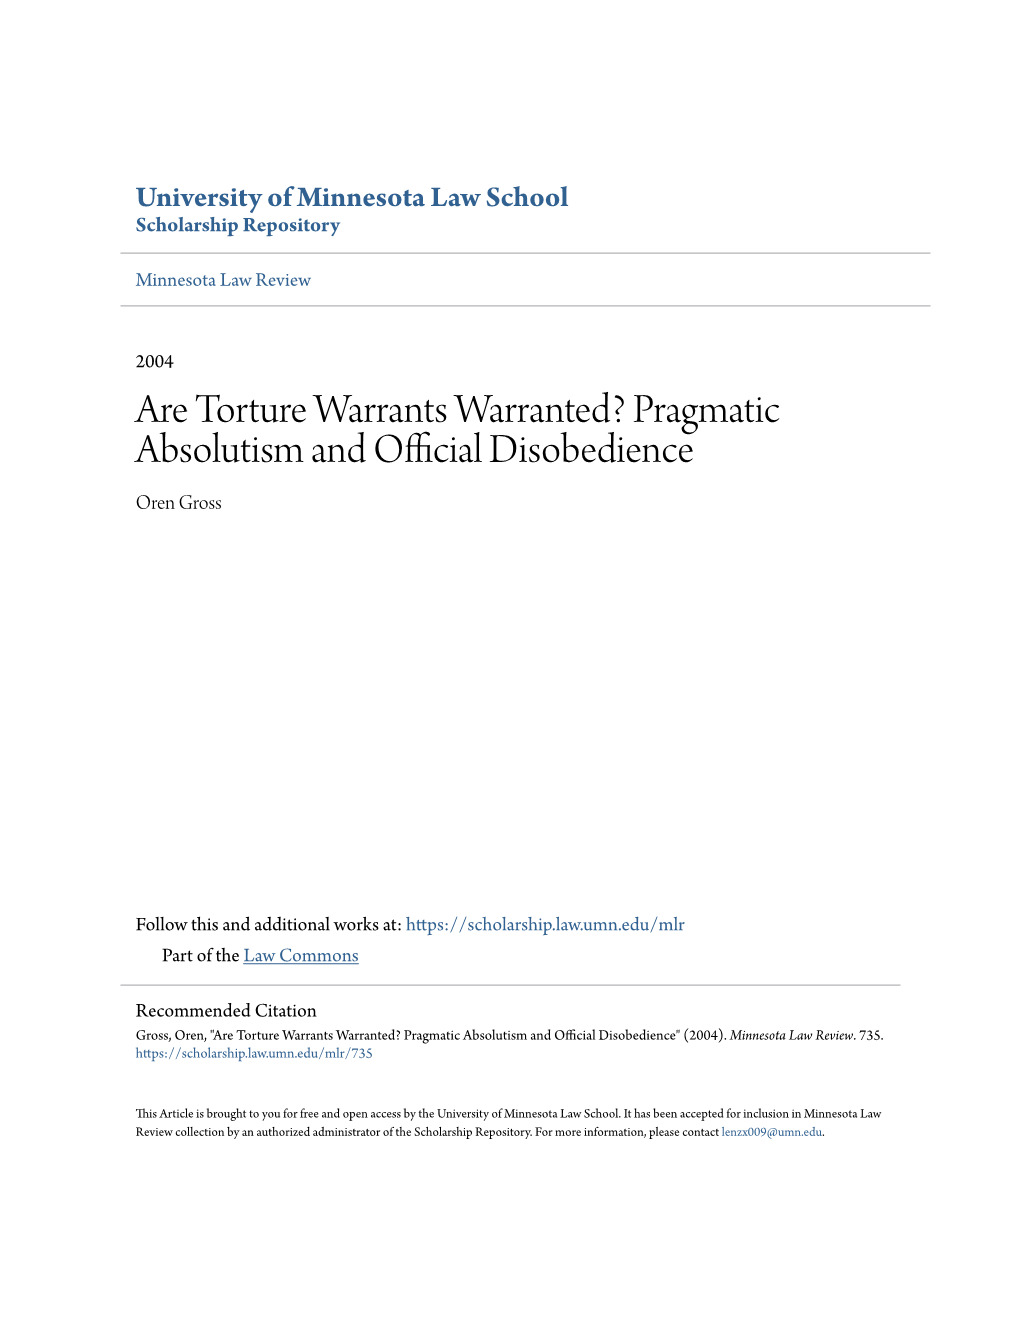 Are Torture Warrants Warranted? Pragmatic Absolutism and Official Disobedience Oren Gross